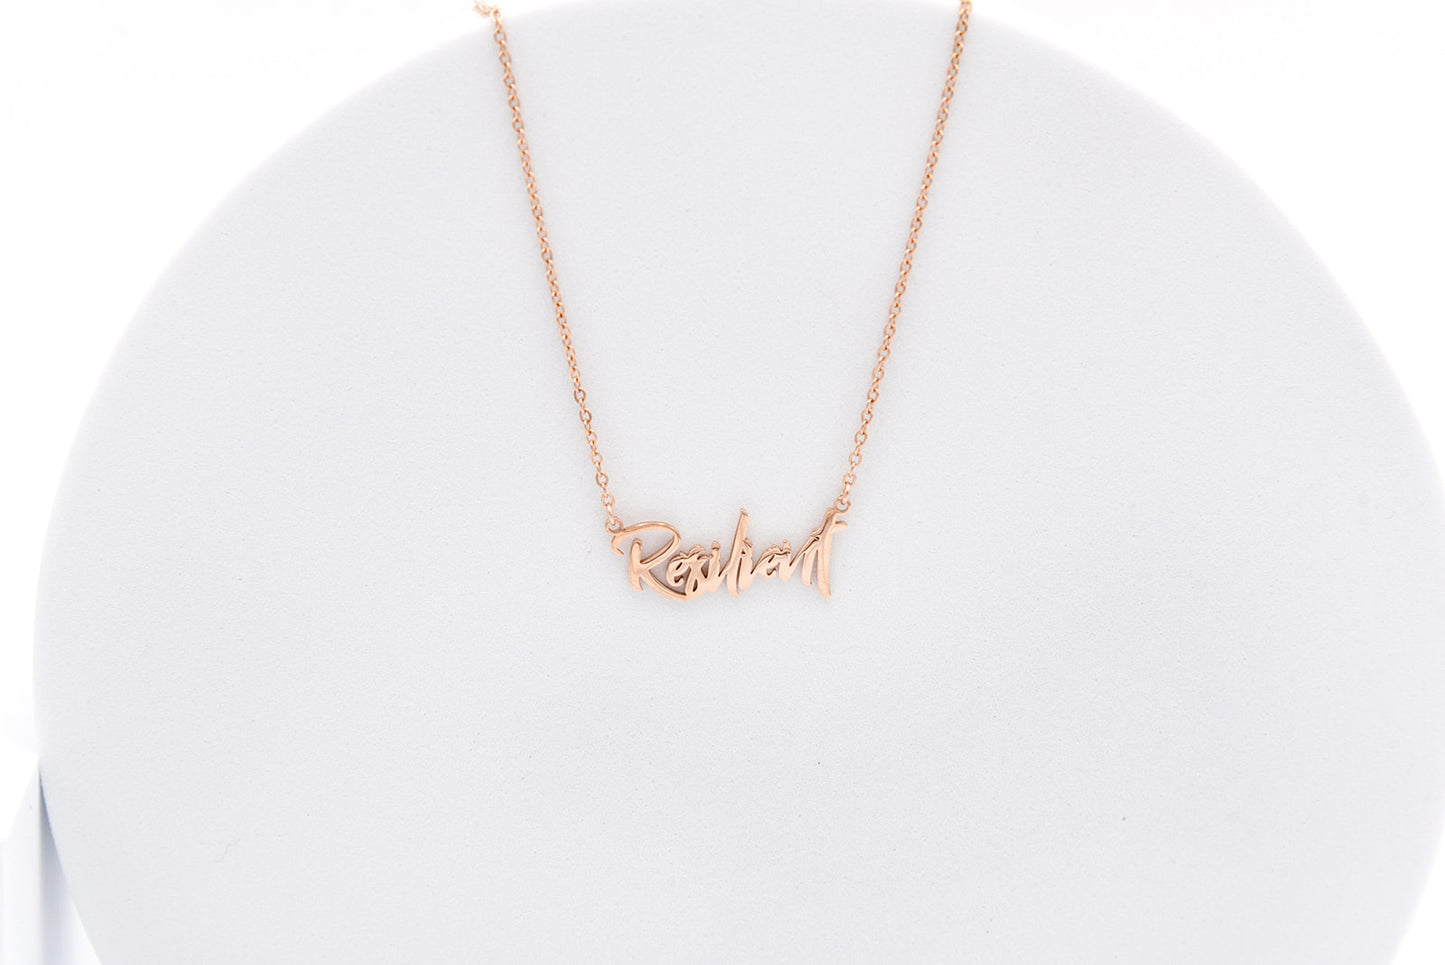 resilient affirmation necklace in color rose gold from Sol Rise Essentials